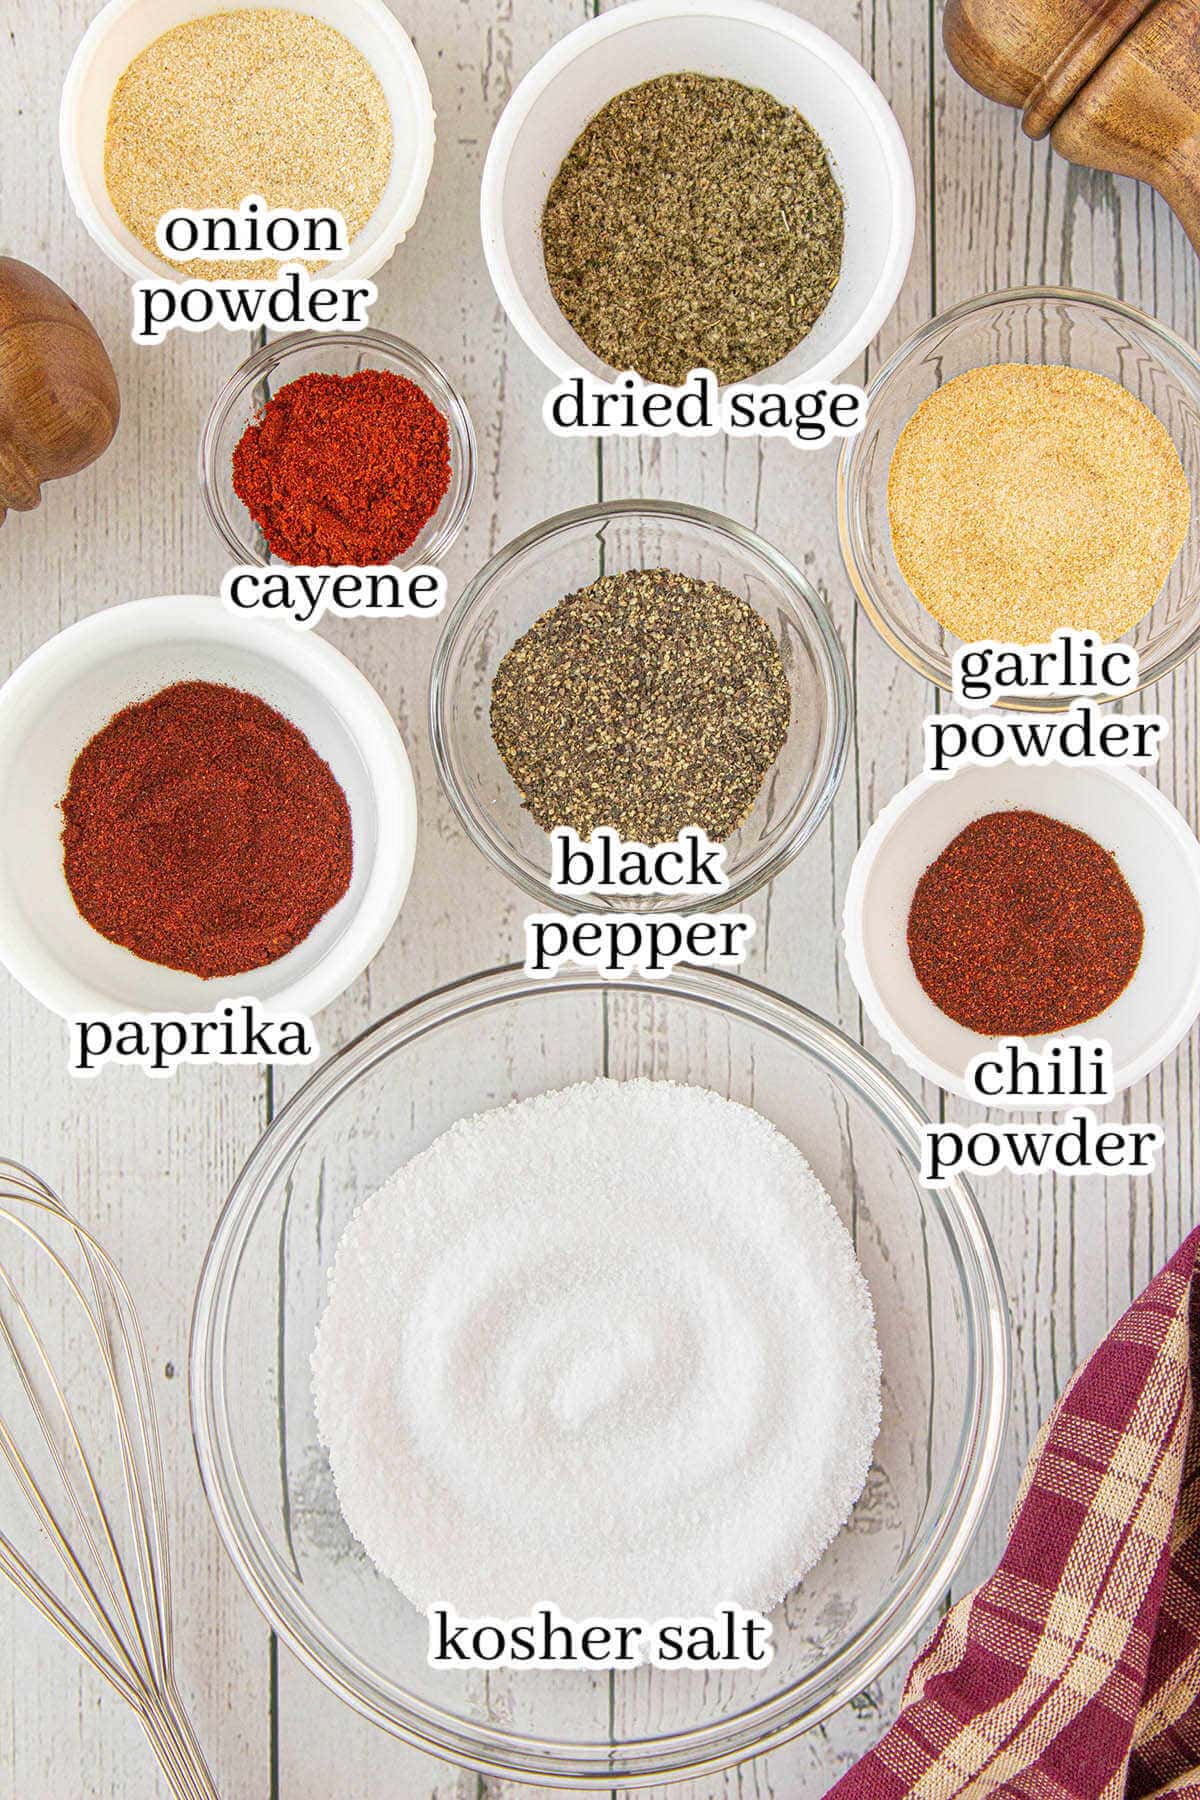 Ingredients to make the recipe, with print overlay.